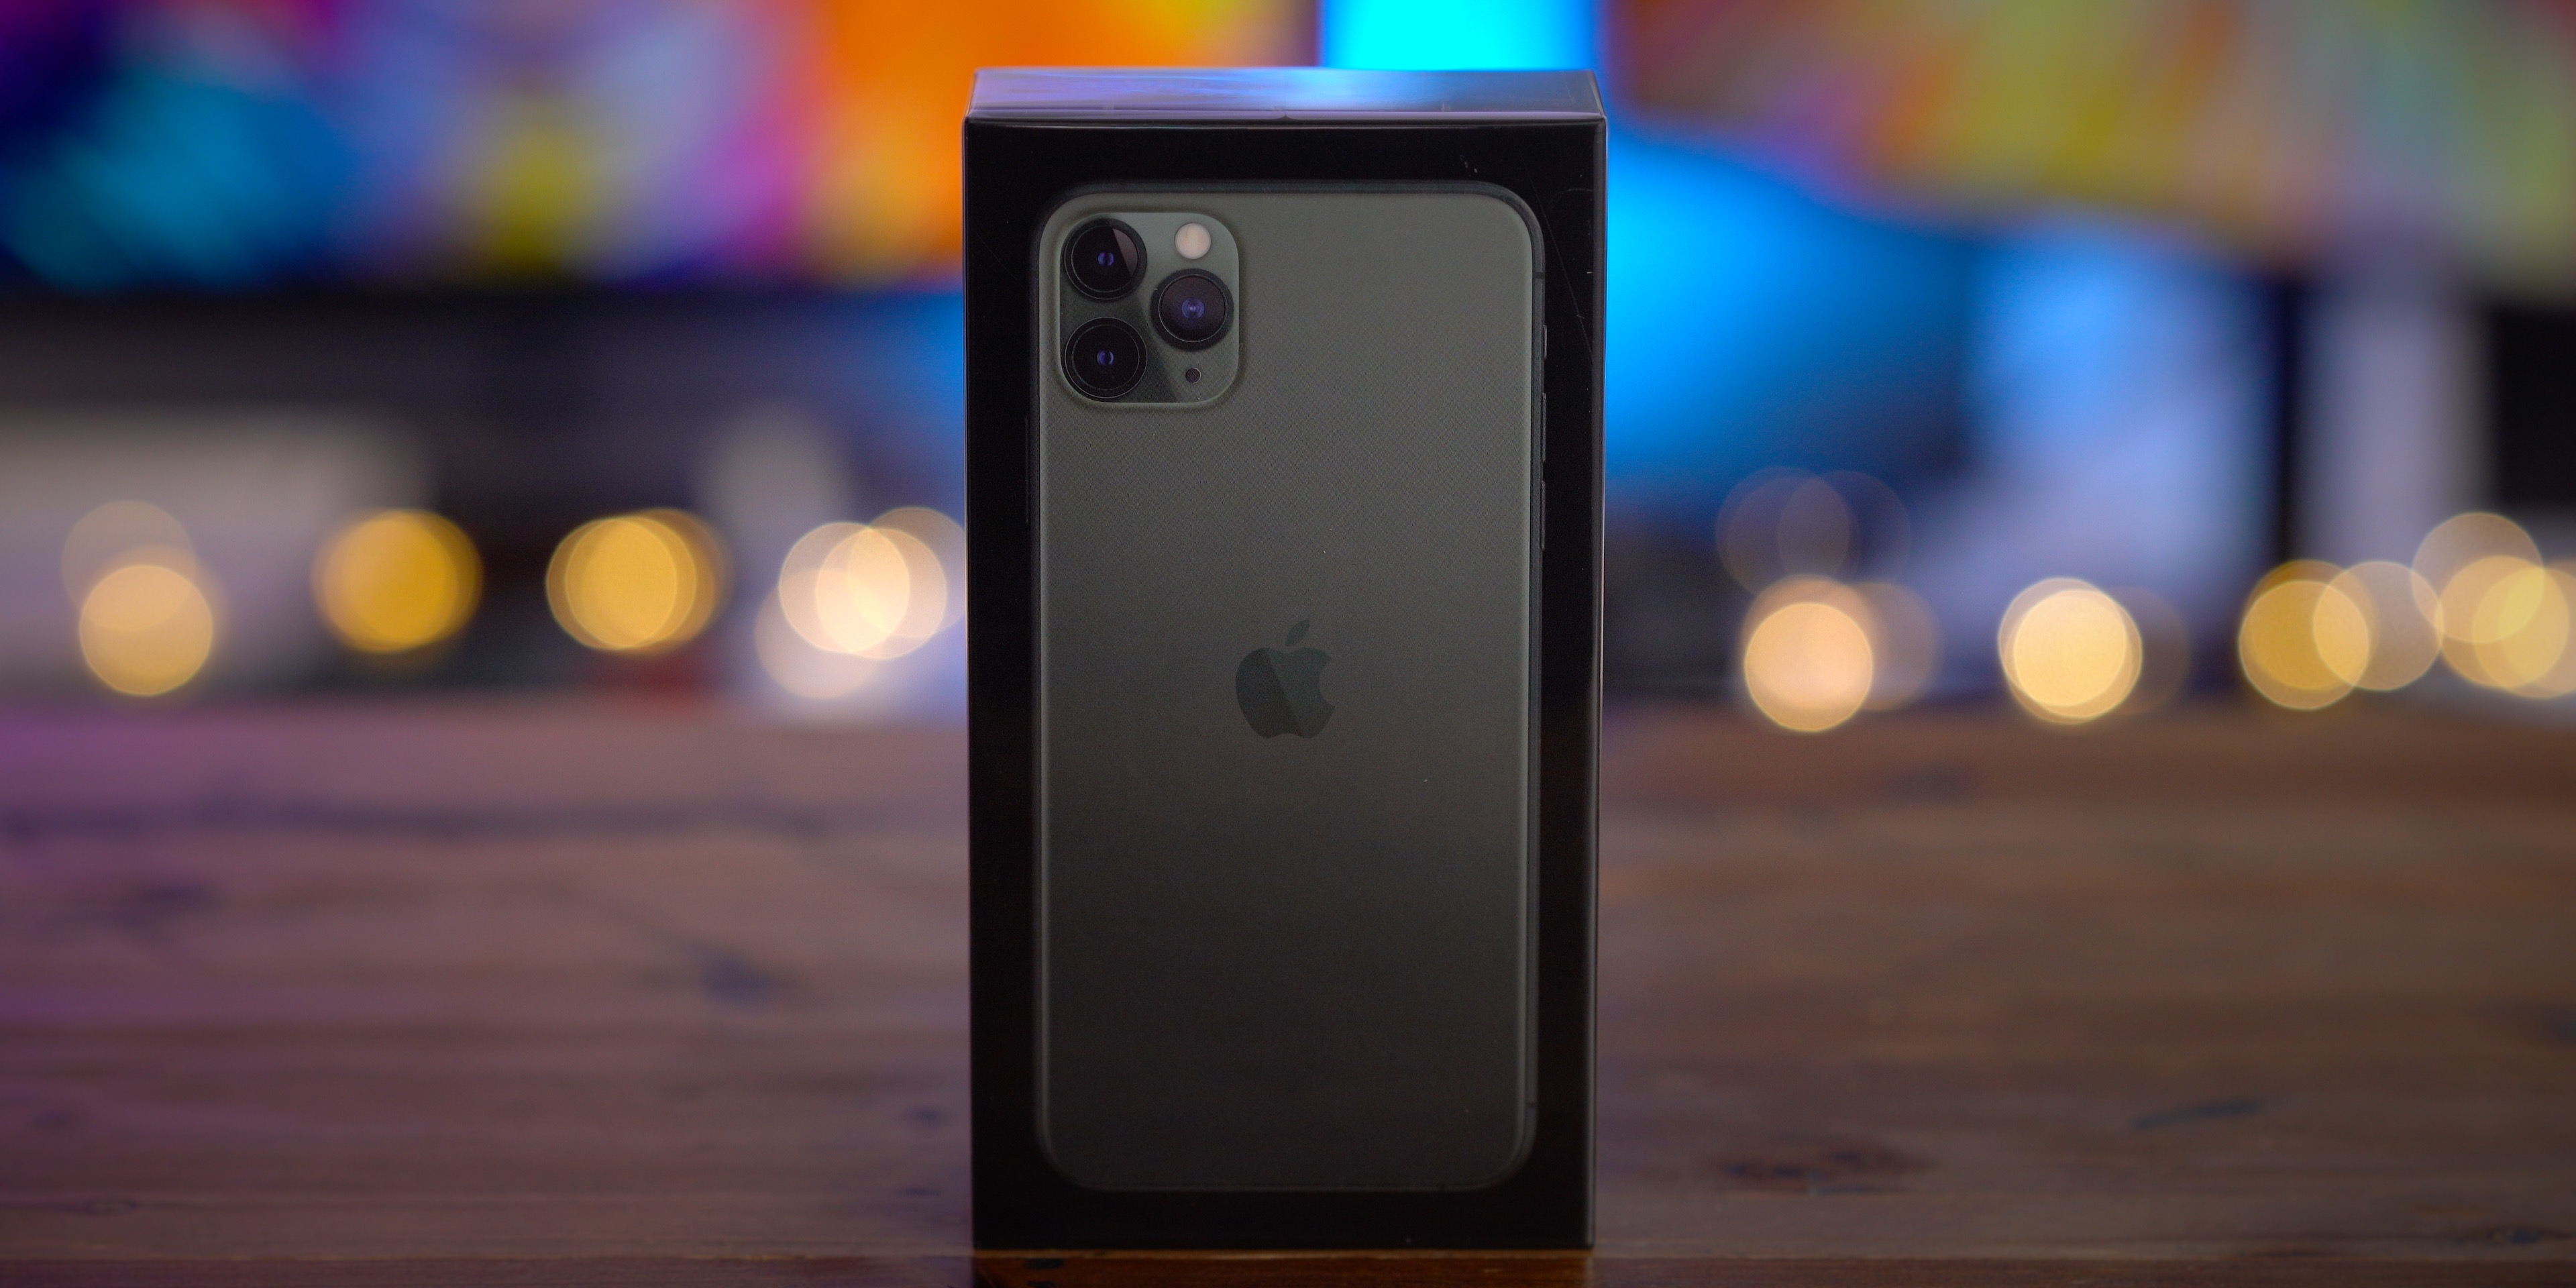 9to5Rewards: iPhone 11 Pro Max giveaway (+ 25% off